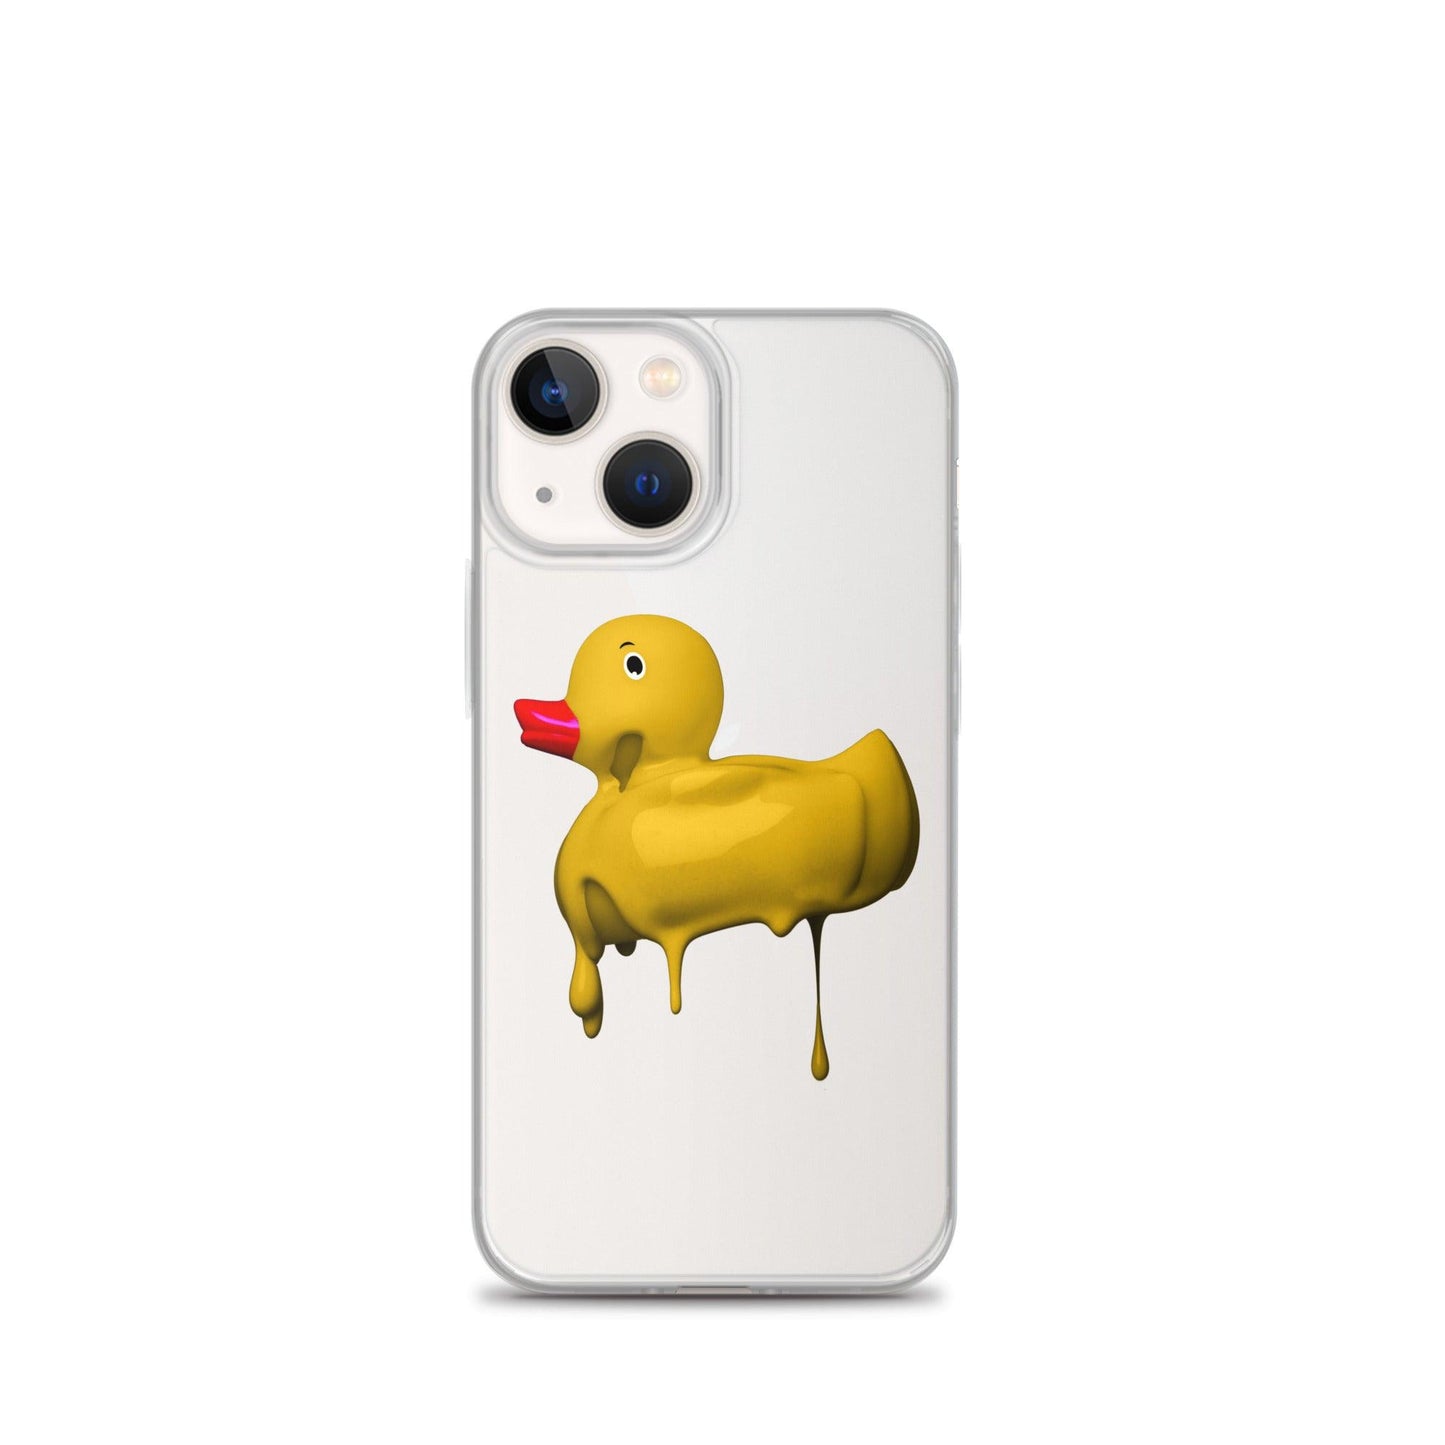 UGLY DUCKLING IPHONE CASE - ACEOFLA